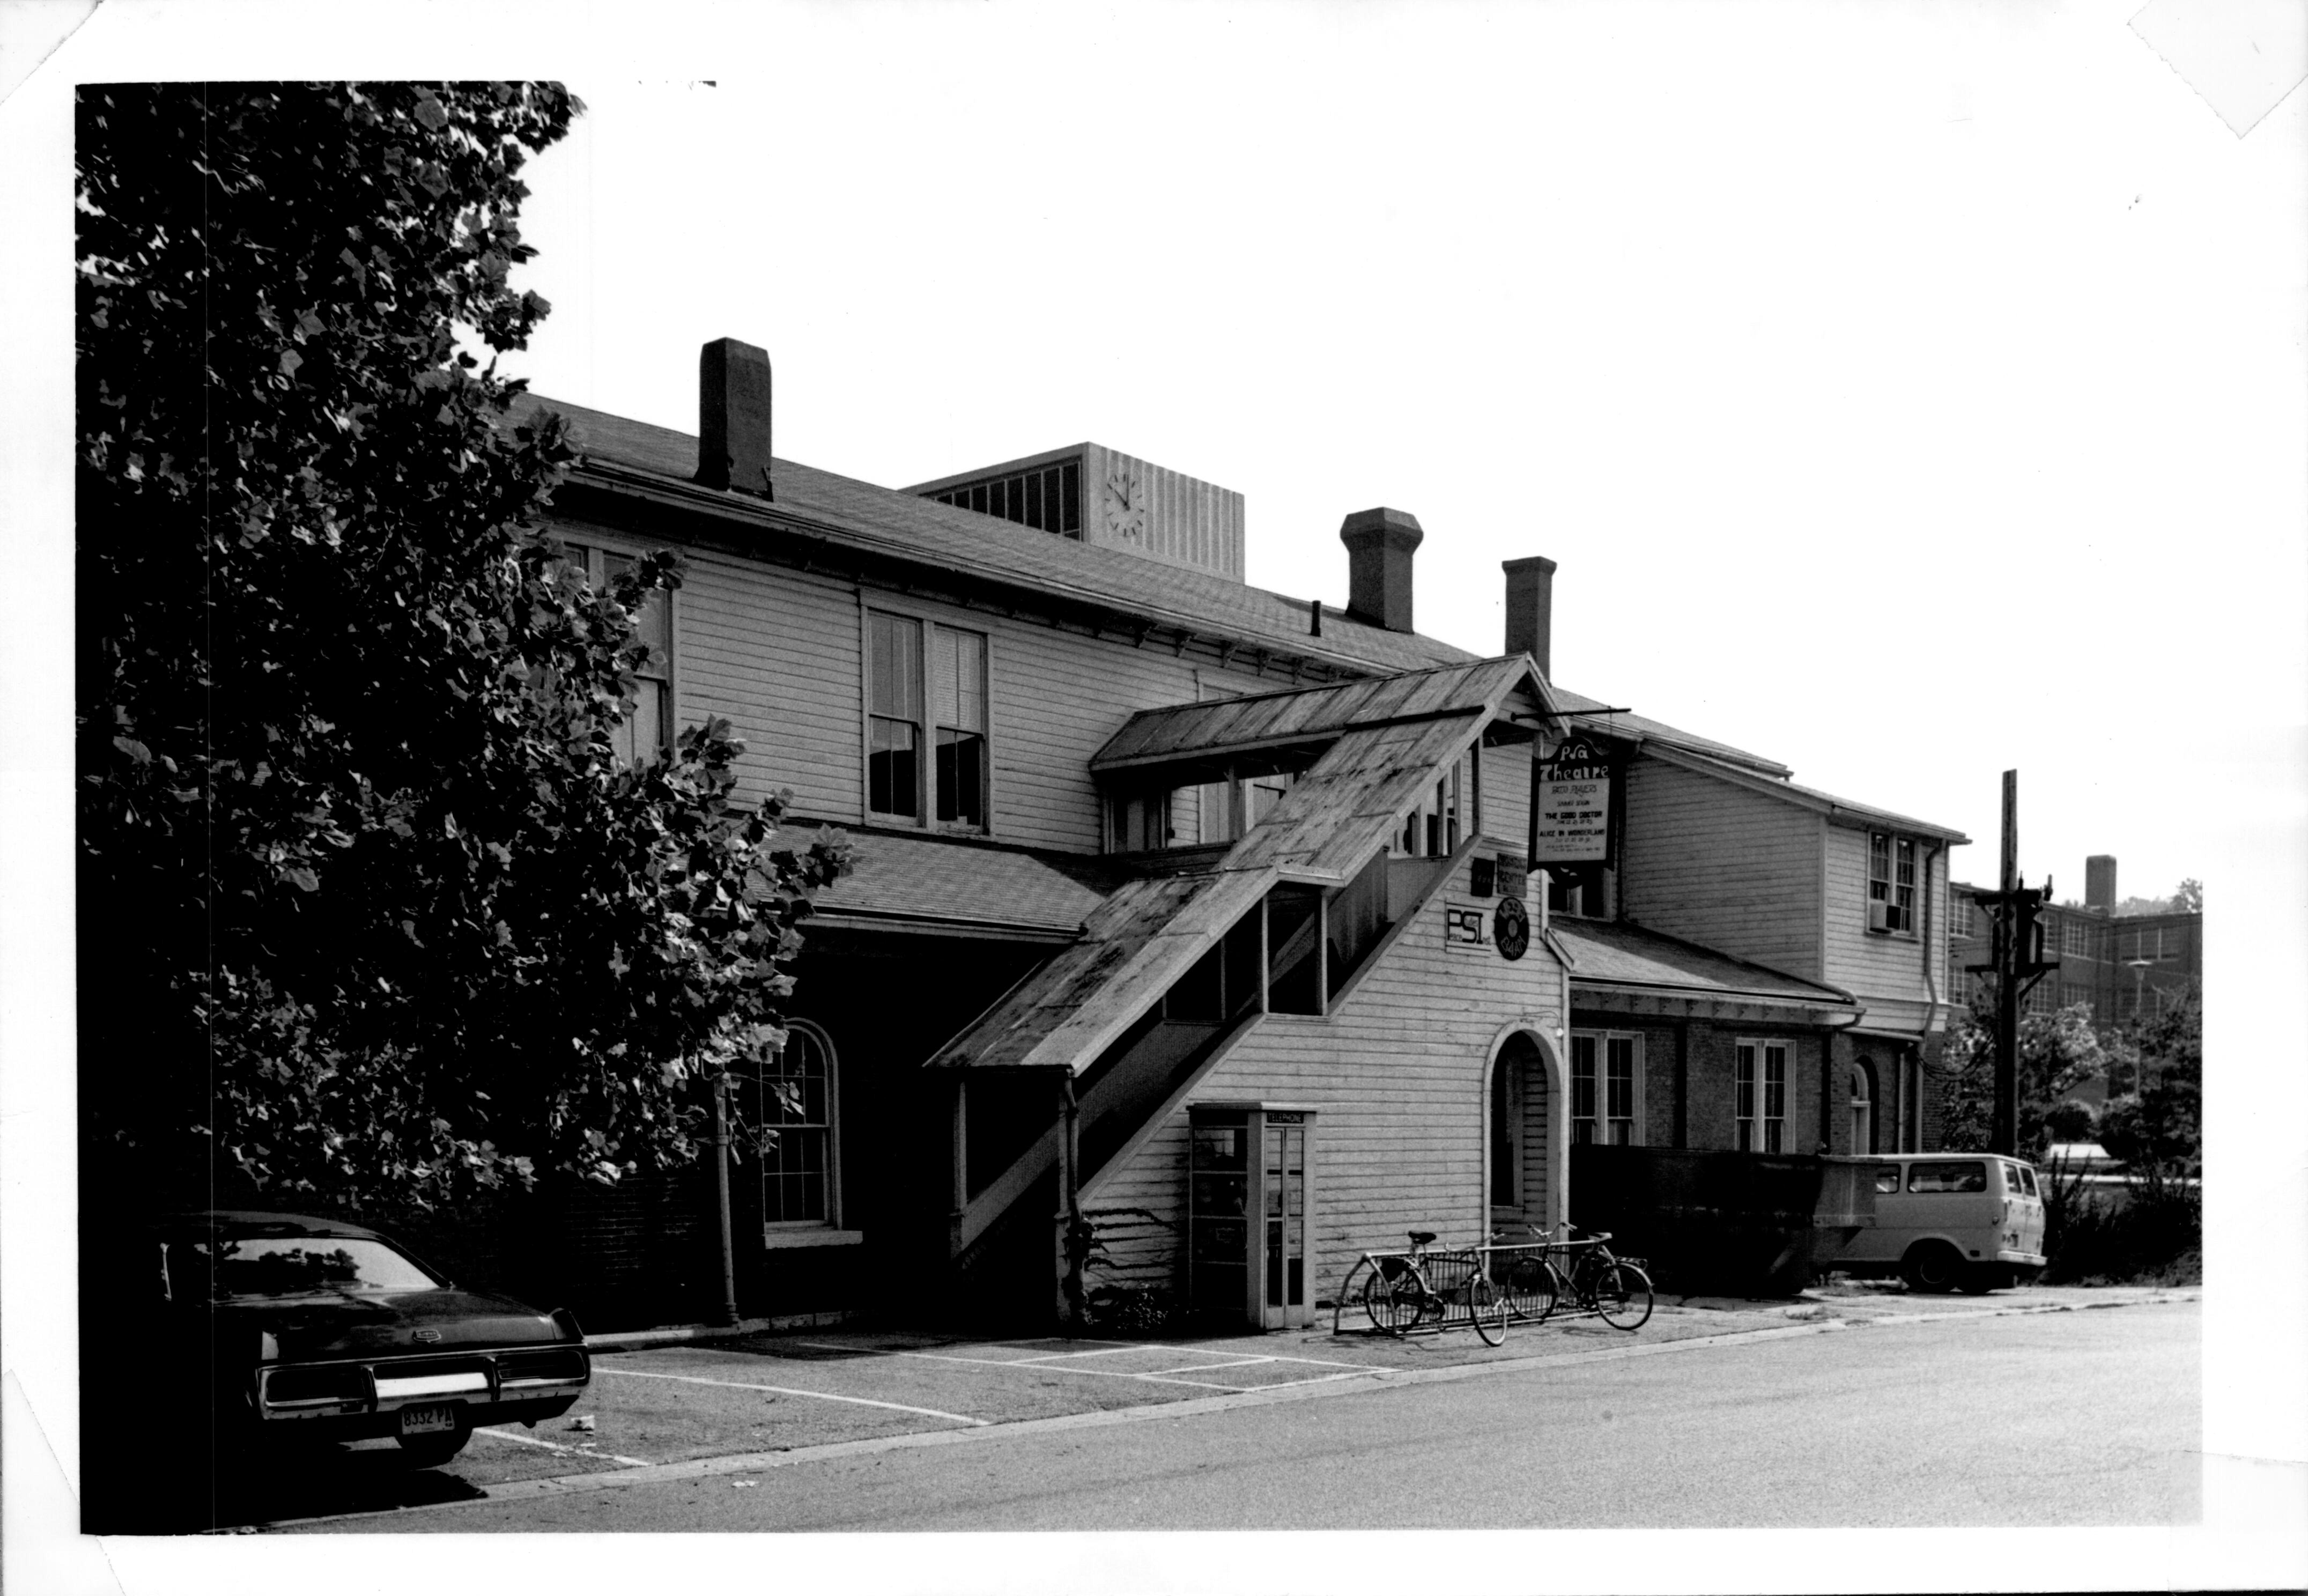 A black and white photo of the Rike building from the 1970s